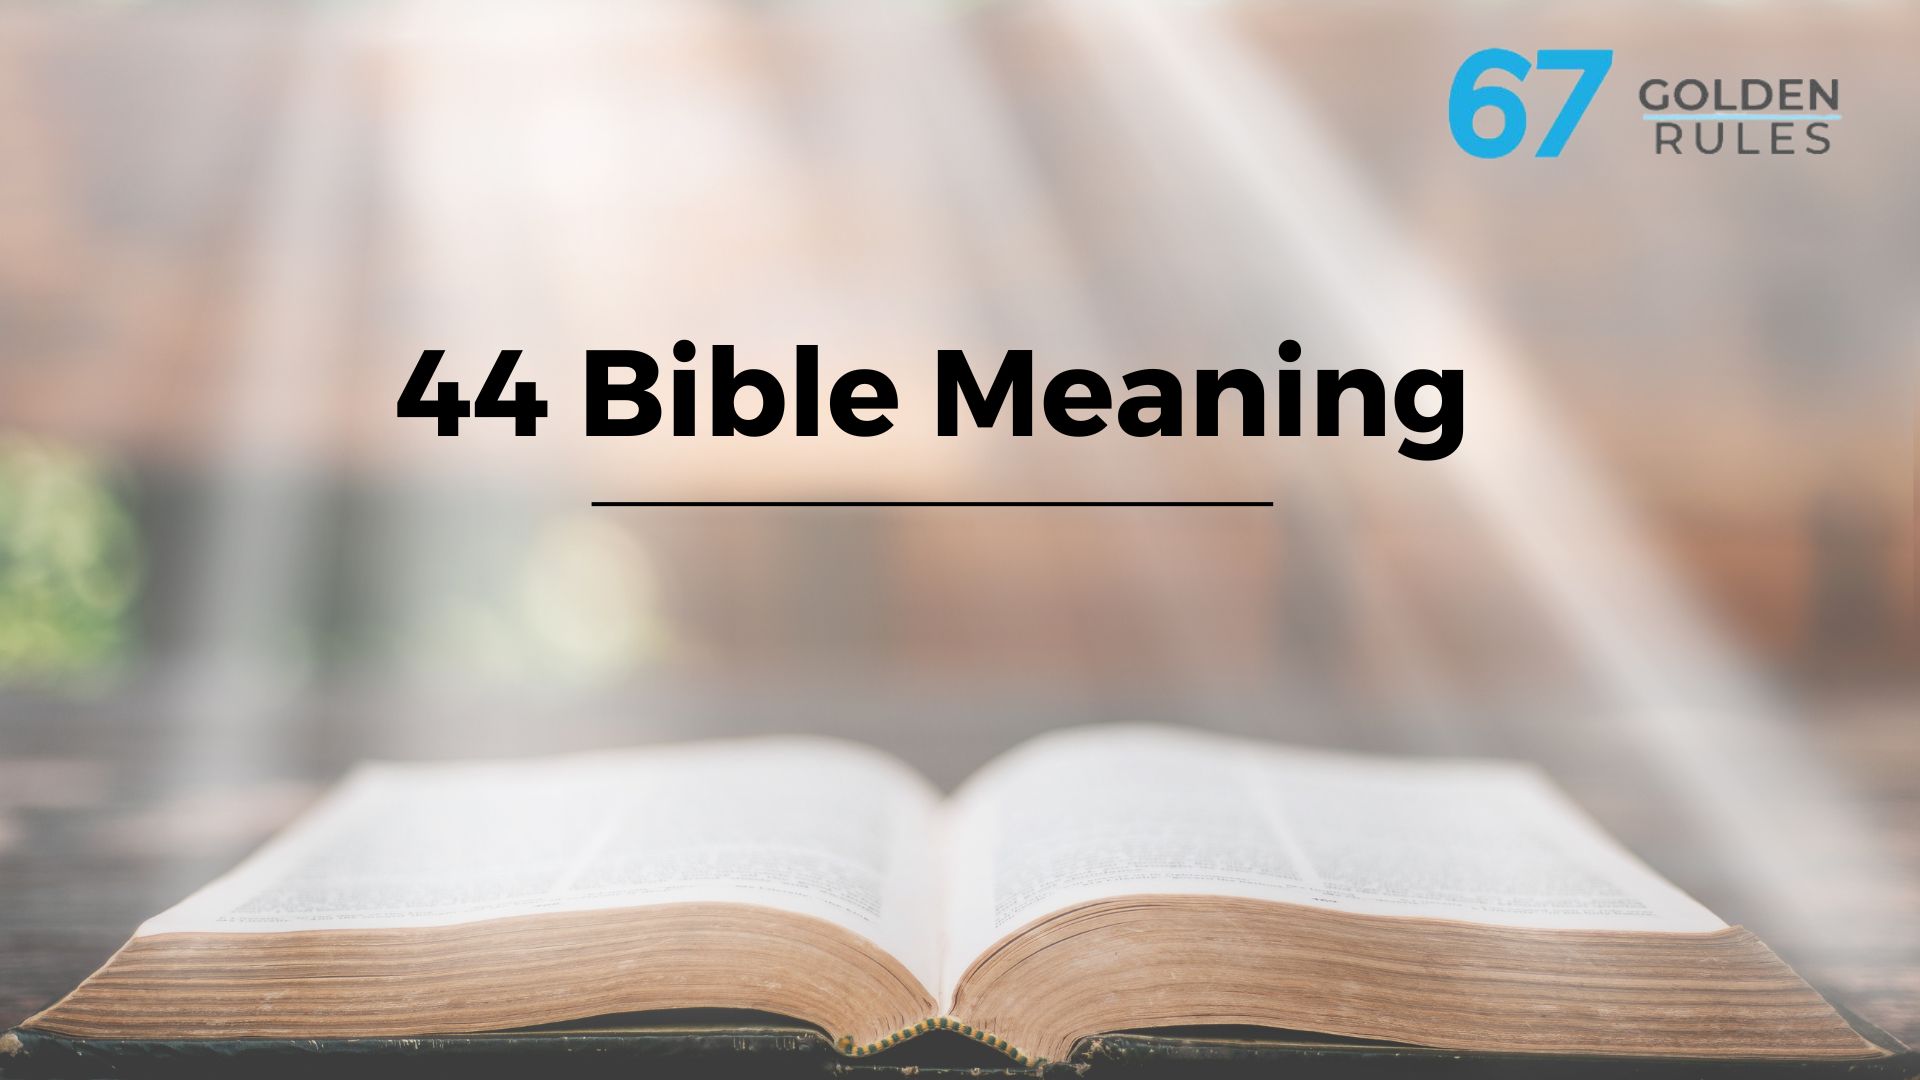 44 Bible Meaning